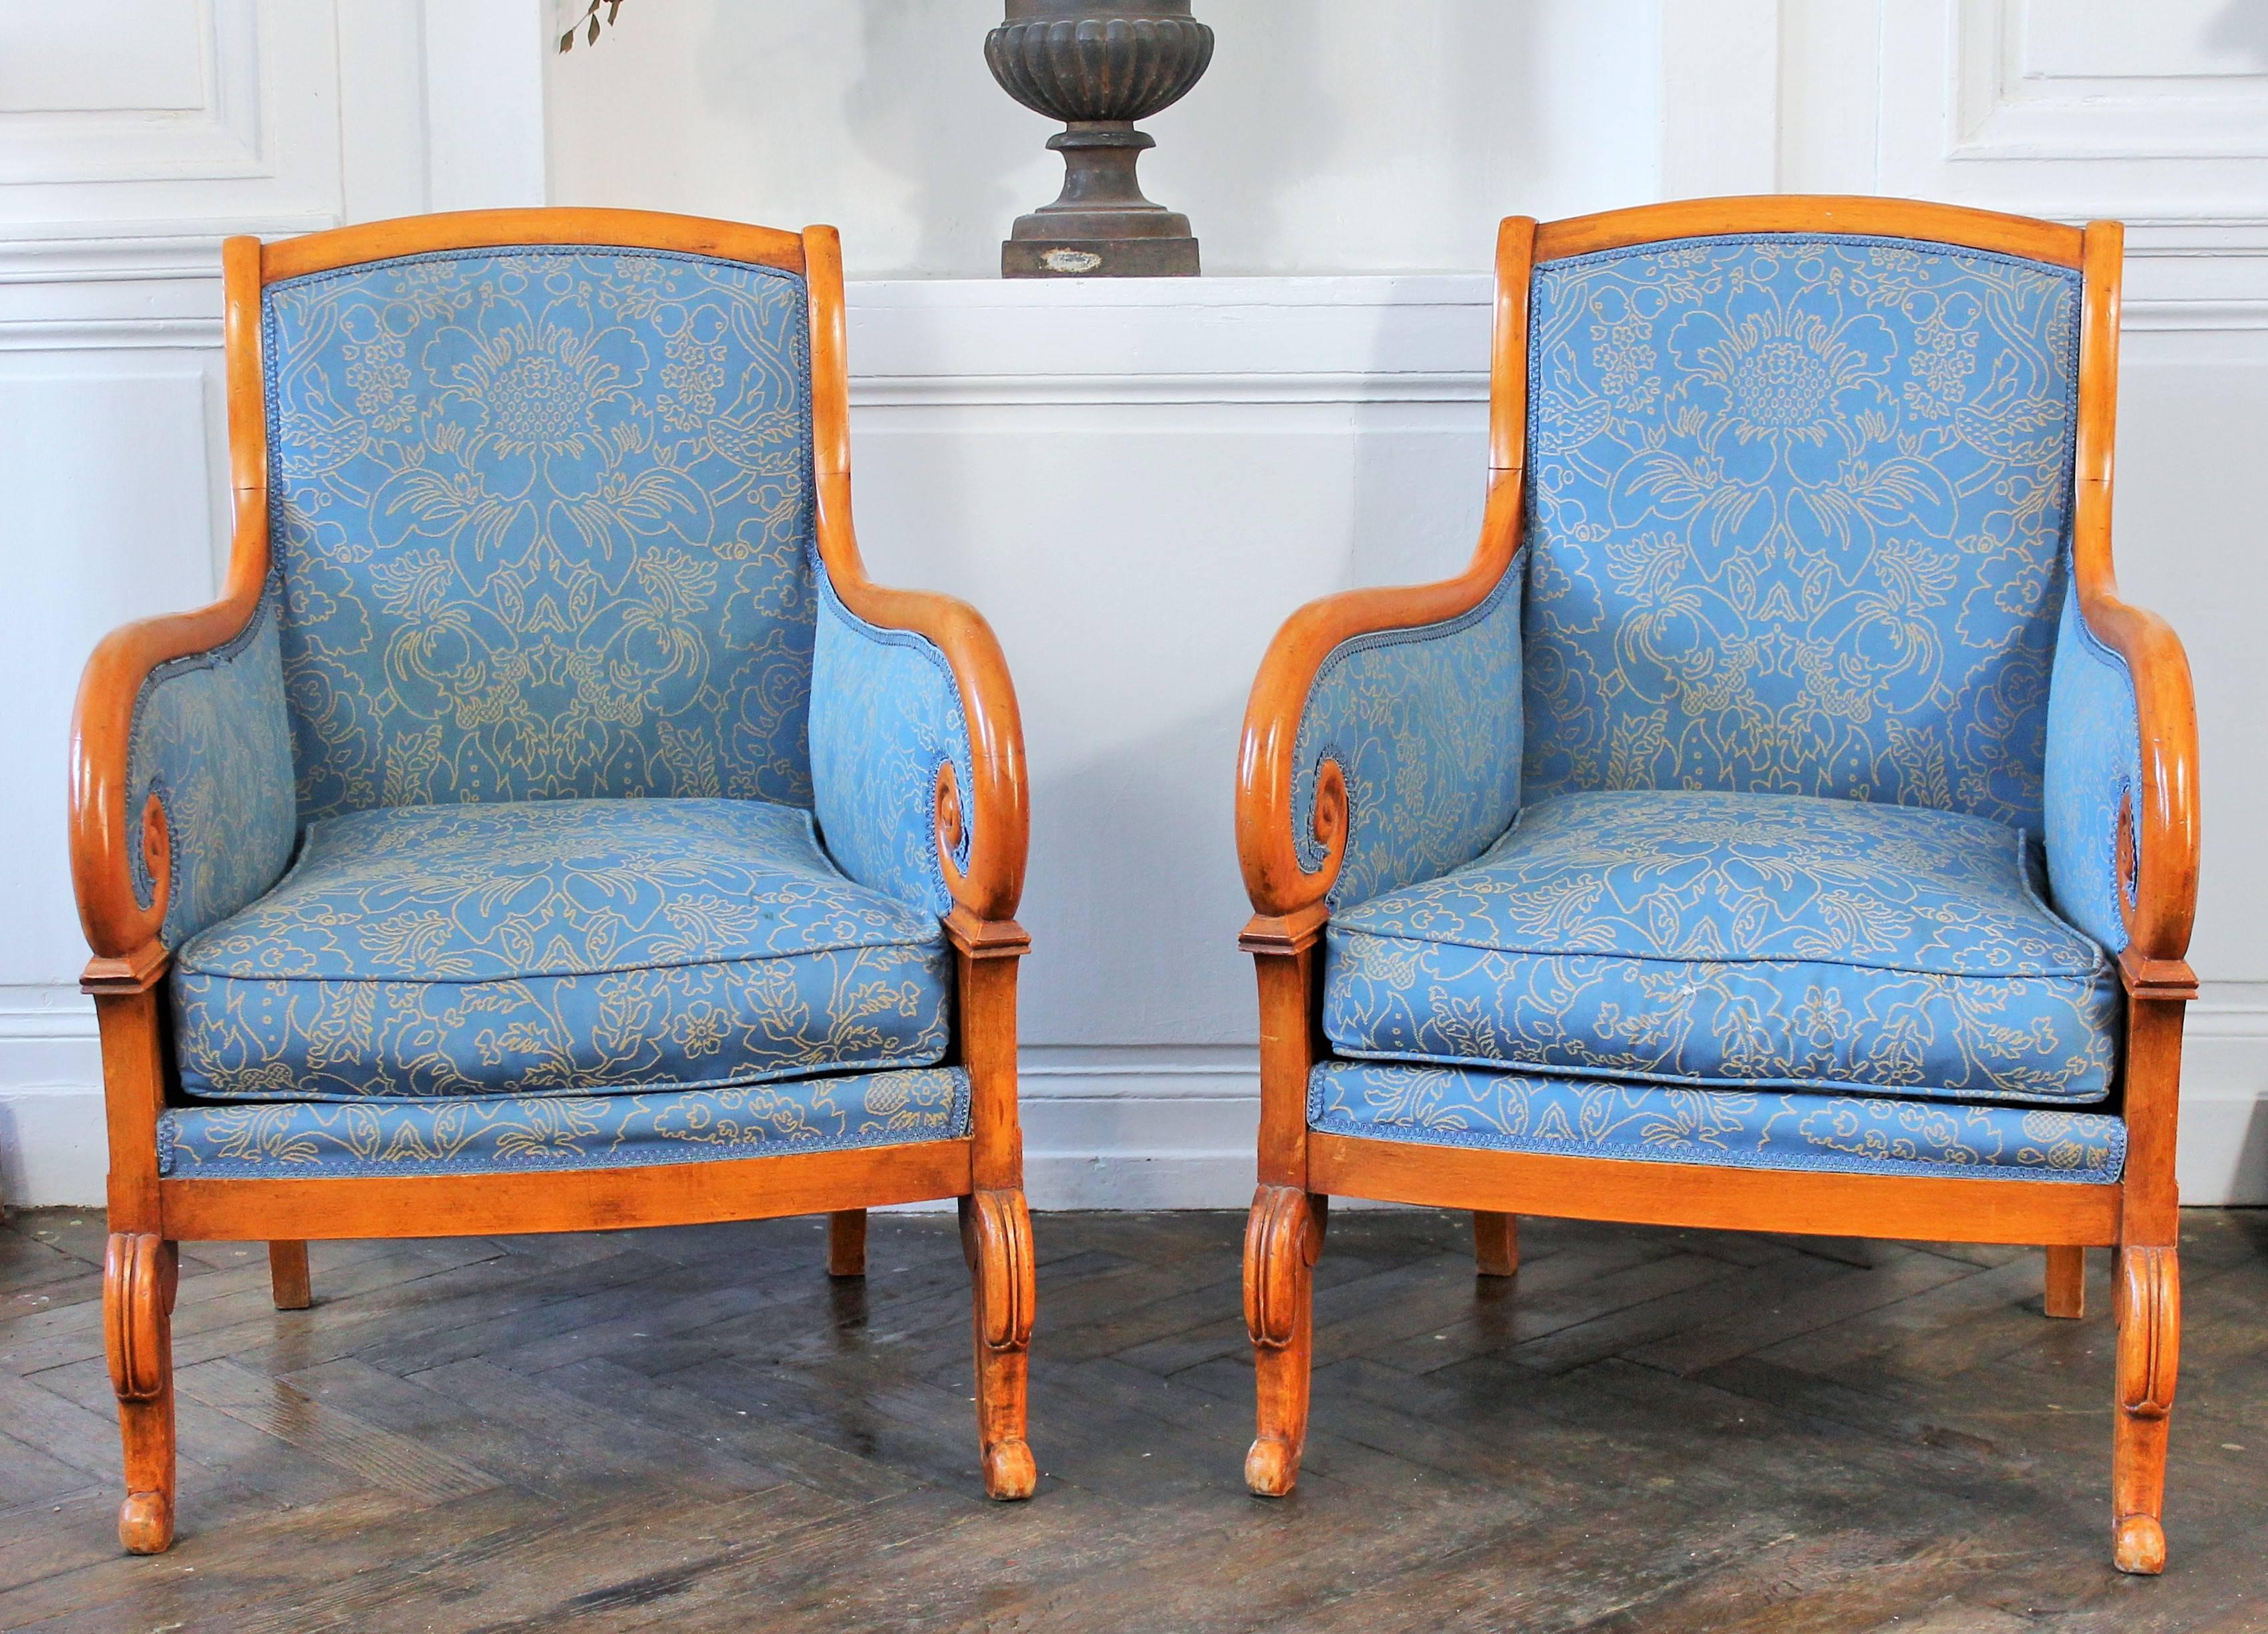 Bergeres armchairs in fruitwood covered with an elegant blue gold fabric.
Louis-Philippe period, first half of the 19th century.